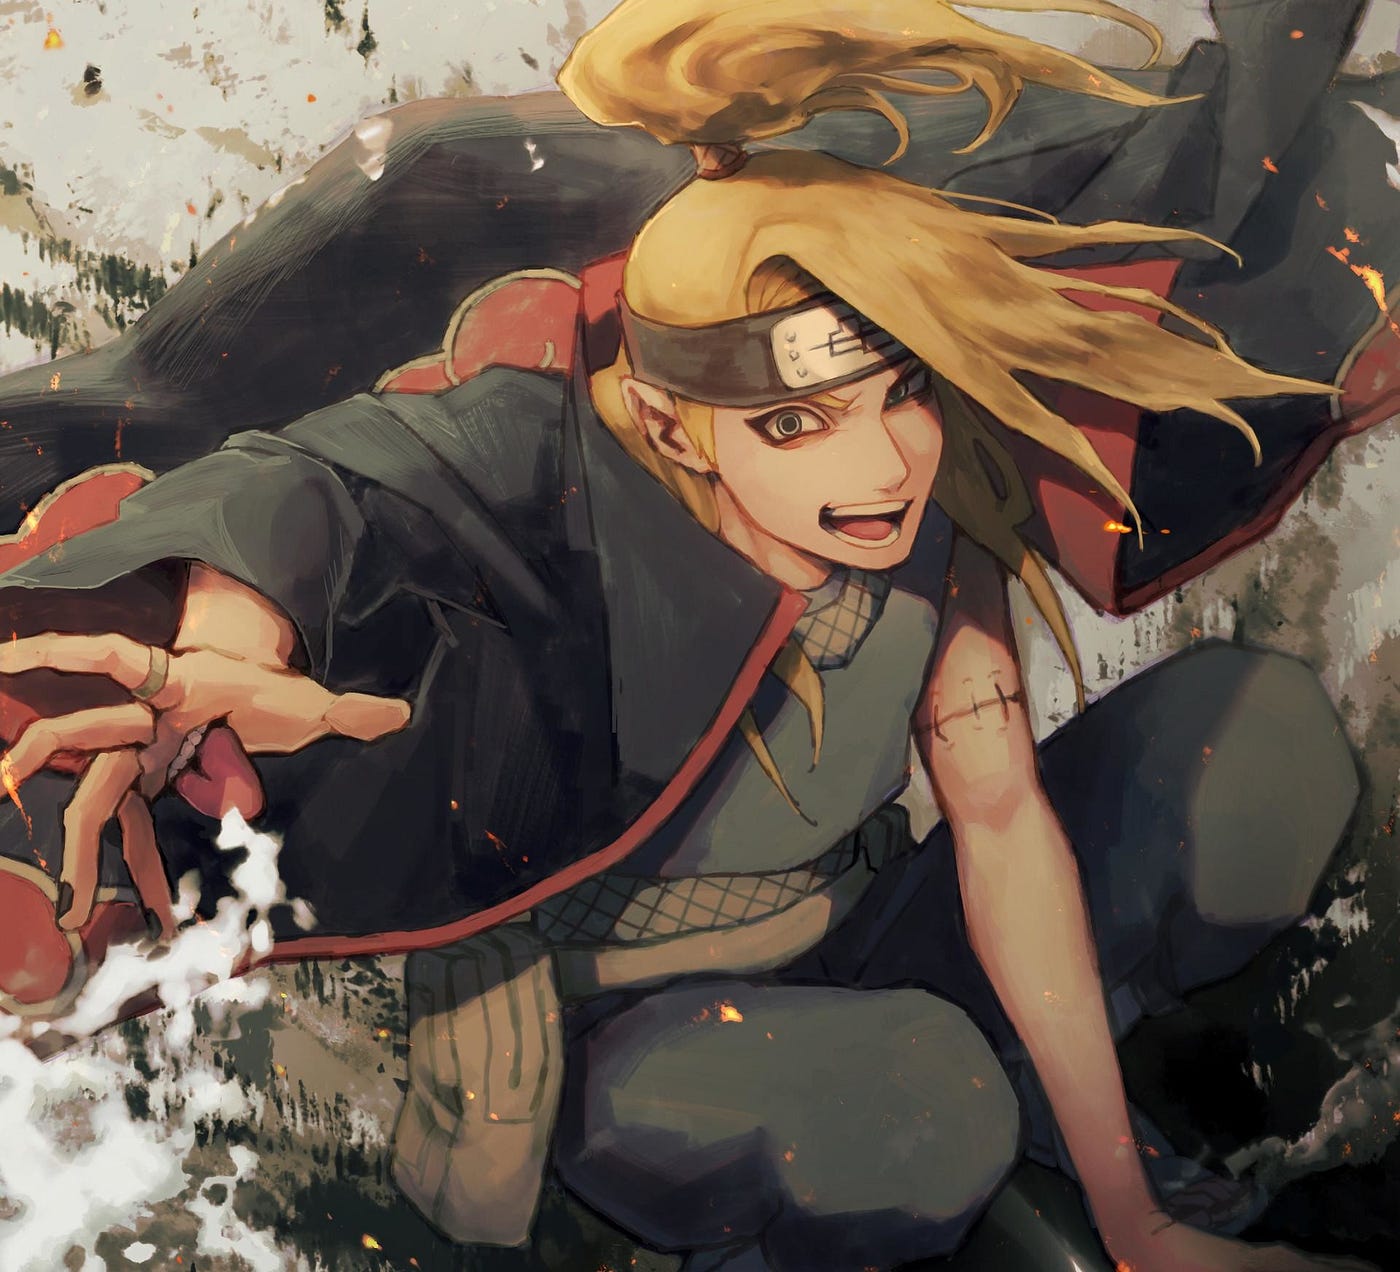 ArtStation - Tried recreating a digital painting of Naruto and